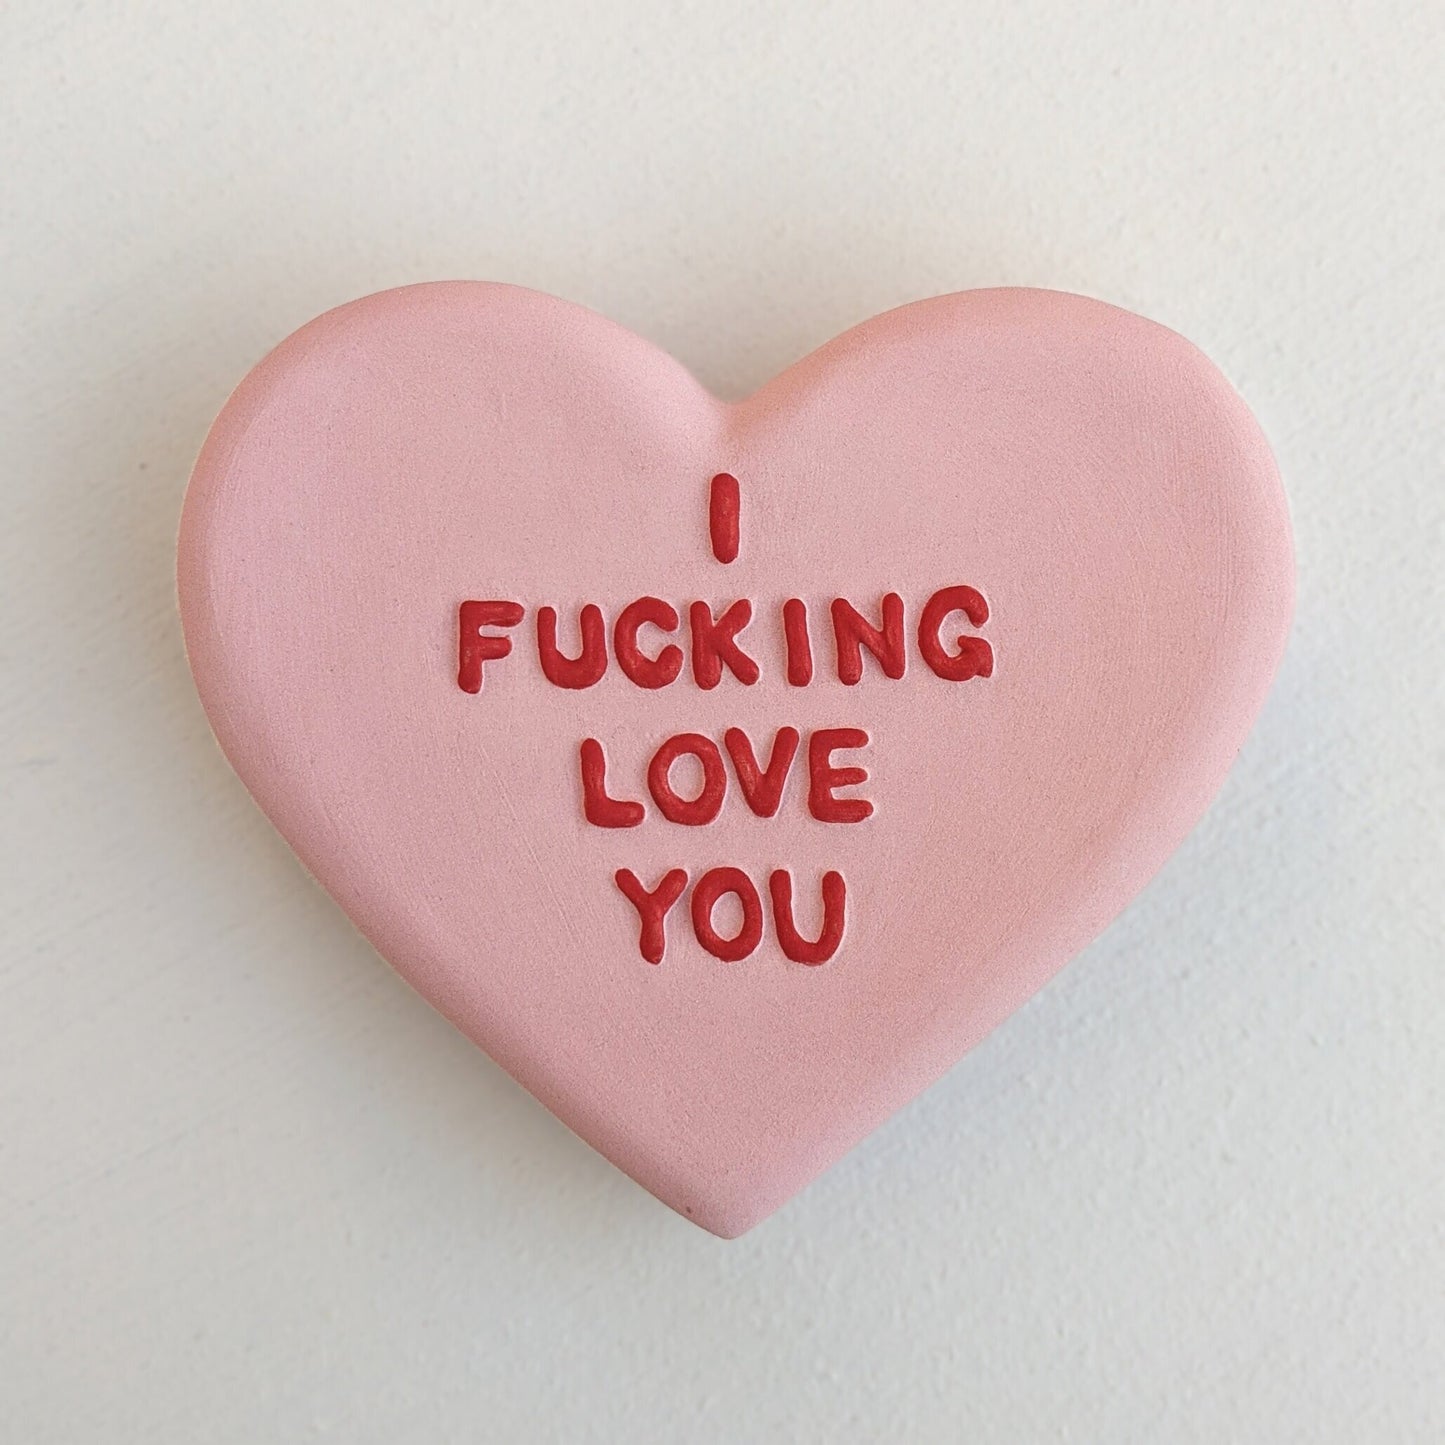 "I F***ING LOVE YOU" Porcelain Puffy Conversational Heart